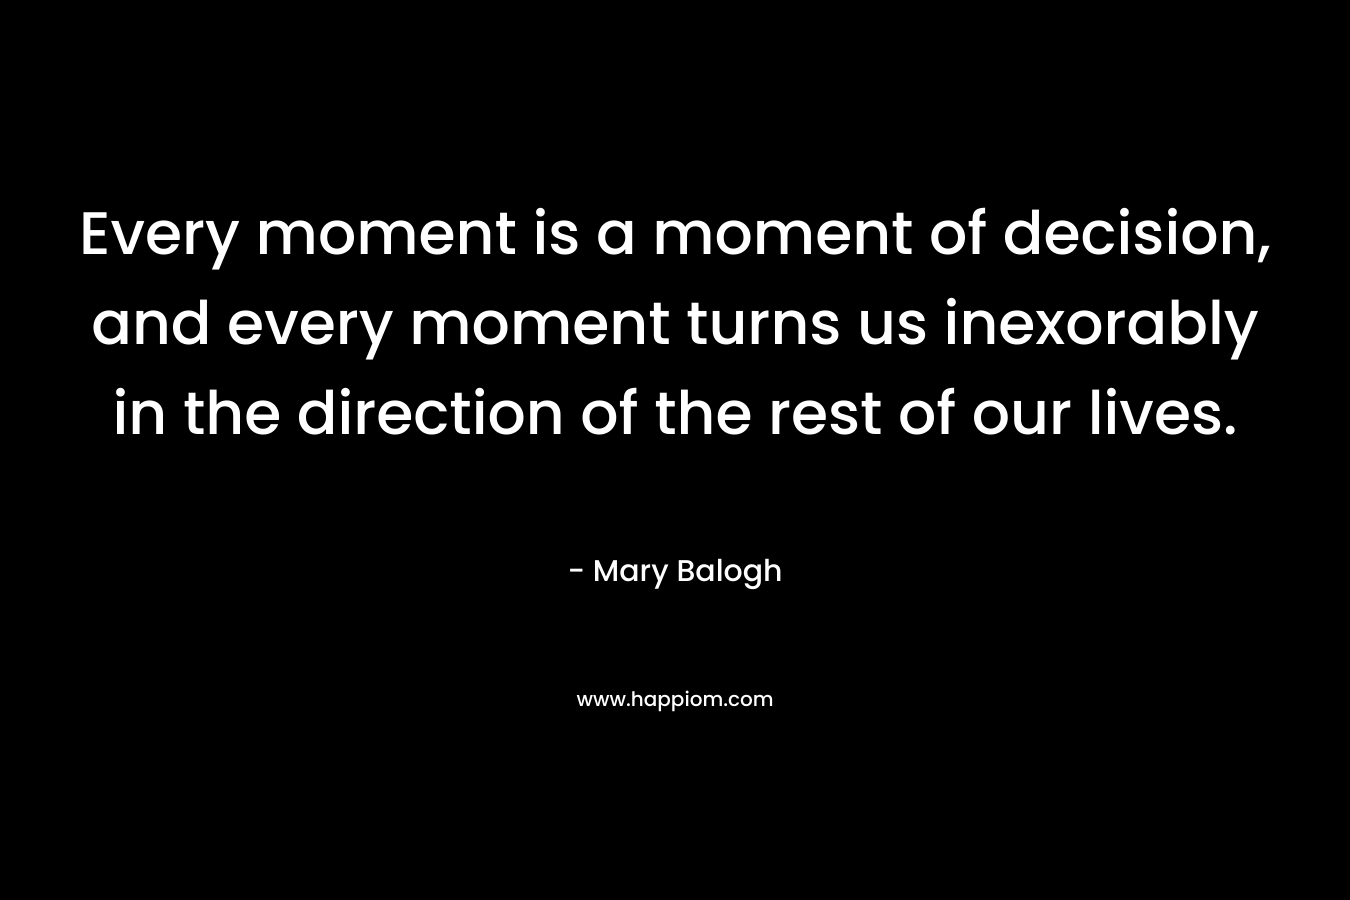 Every moment is a moment of decision, and every moment turns us inexorably in the direction of the rest of our lives. – Mary Balogh